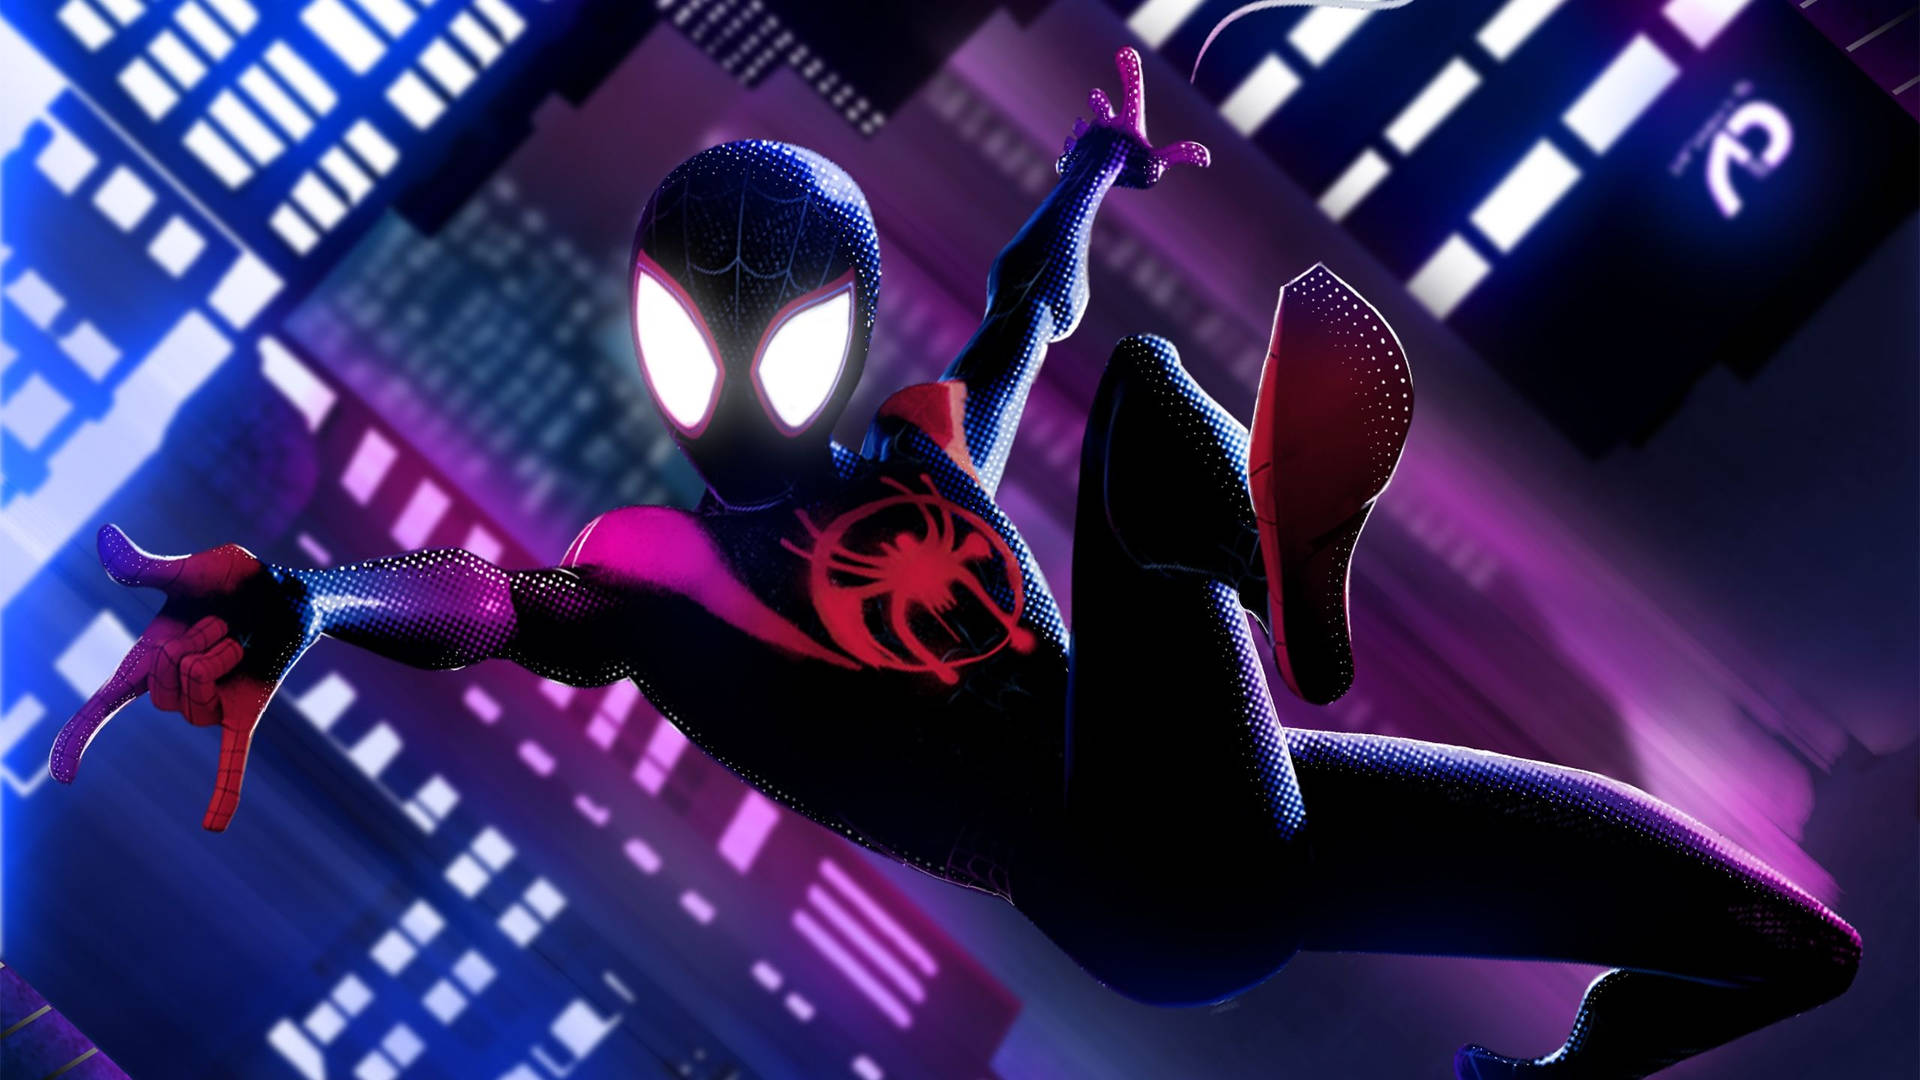 Miles Morales swings above the neon-illuminated city. Wallpaper